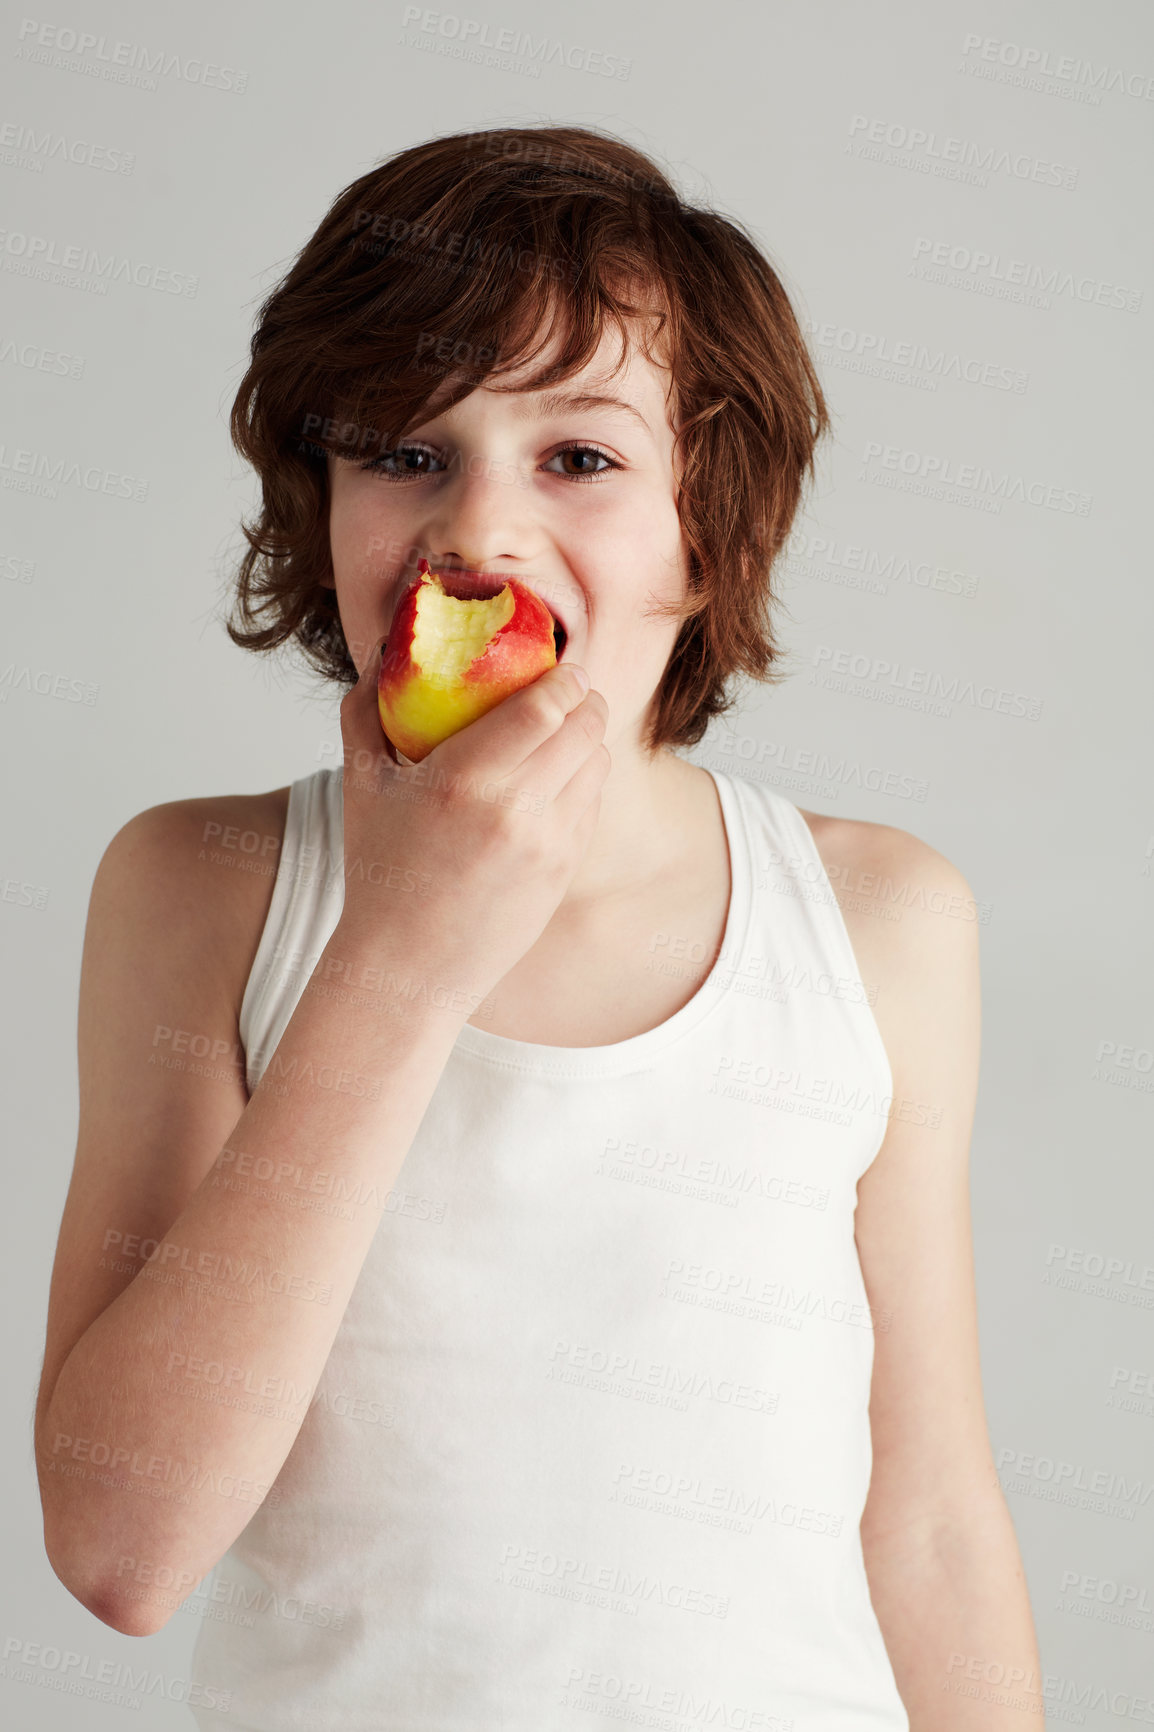 Buy stock photo Portrait of a young boy eating an apple